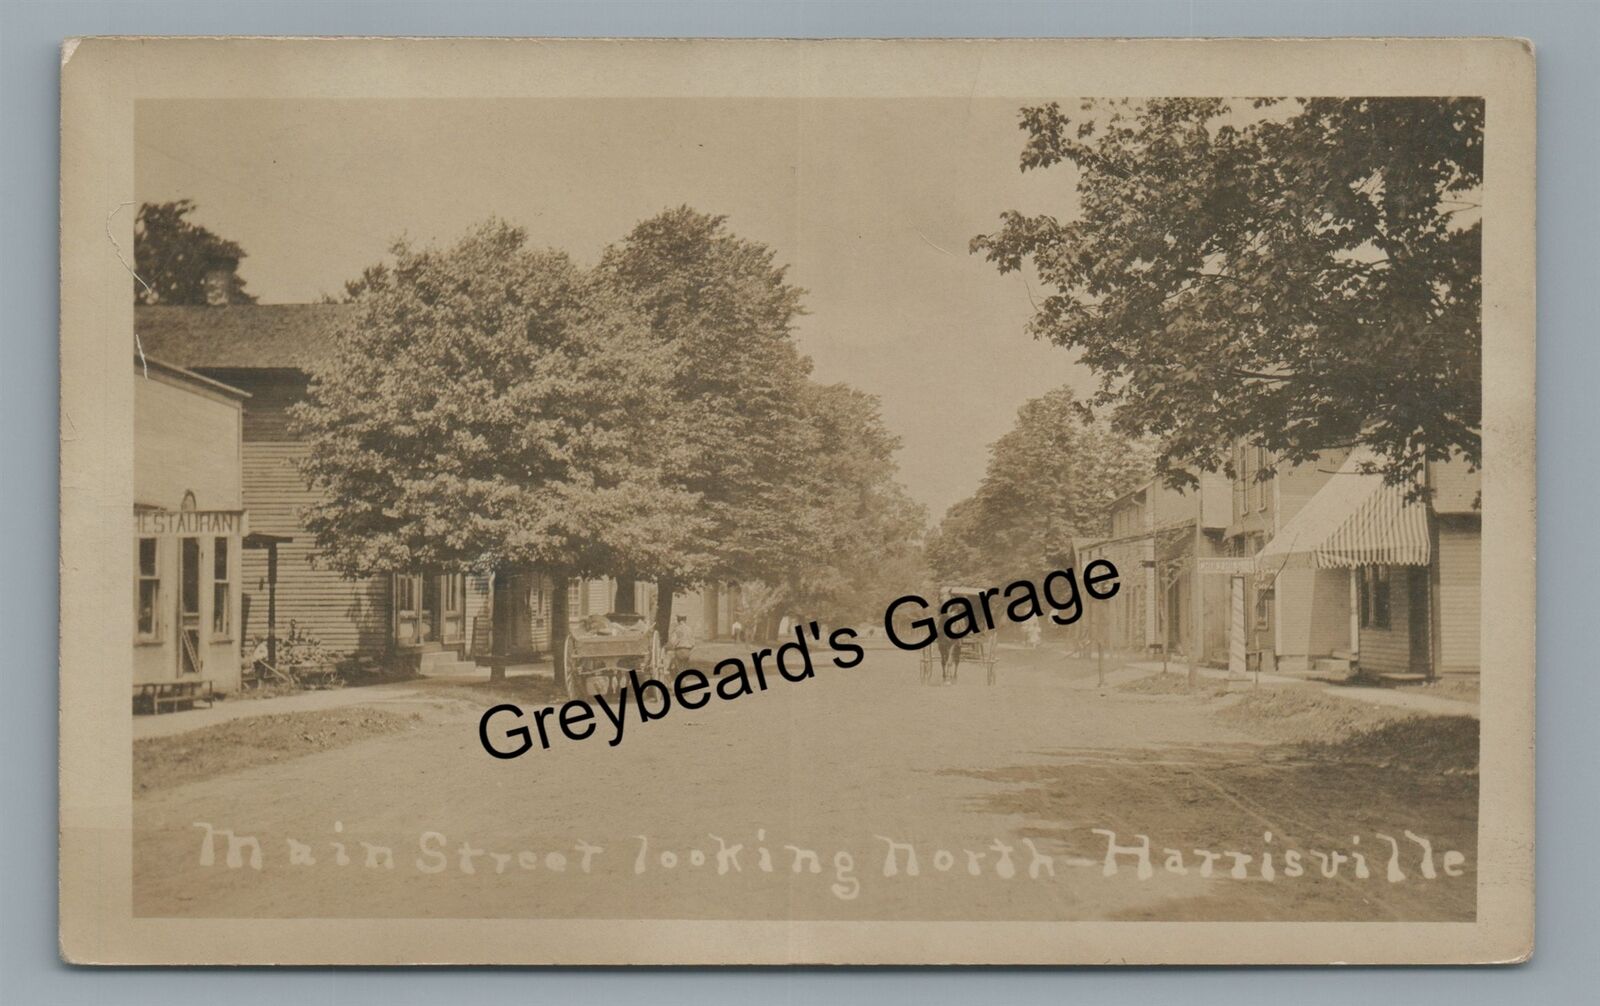 RPPC Main Street Looking North HARRISVILLE PA Butler County Real Photo Postcard